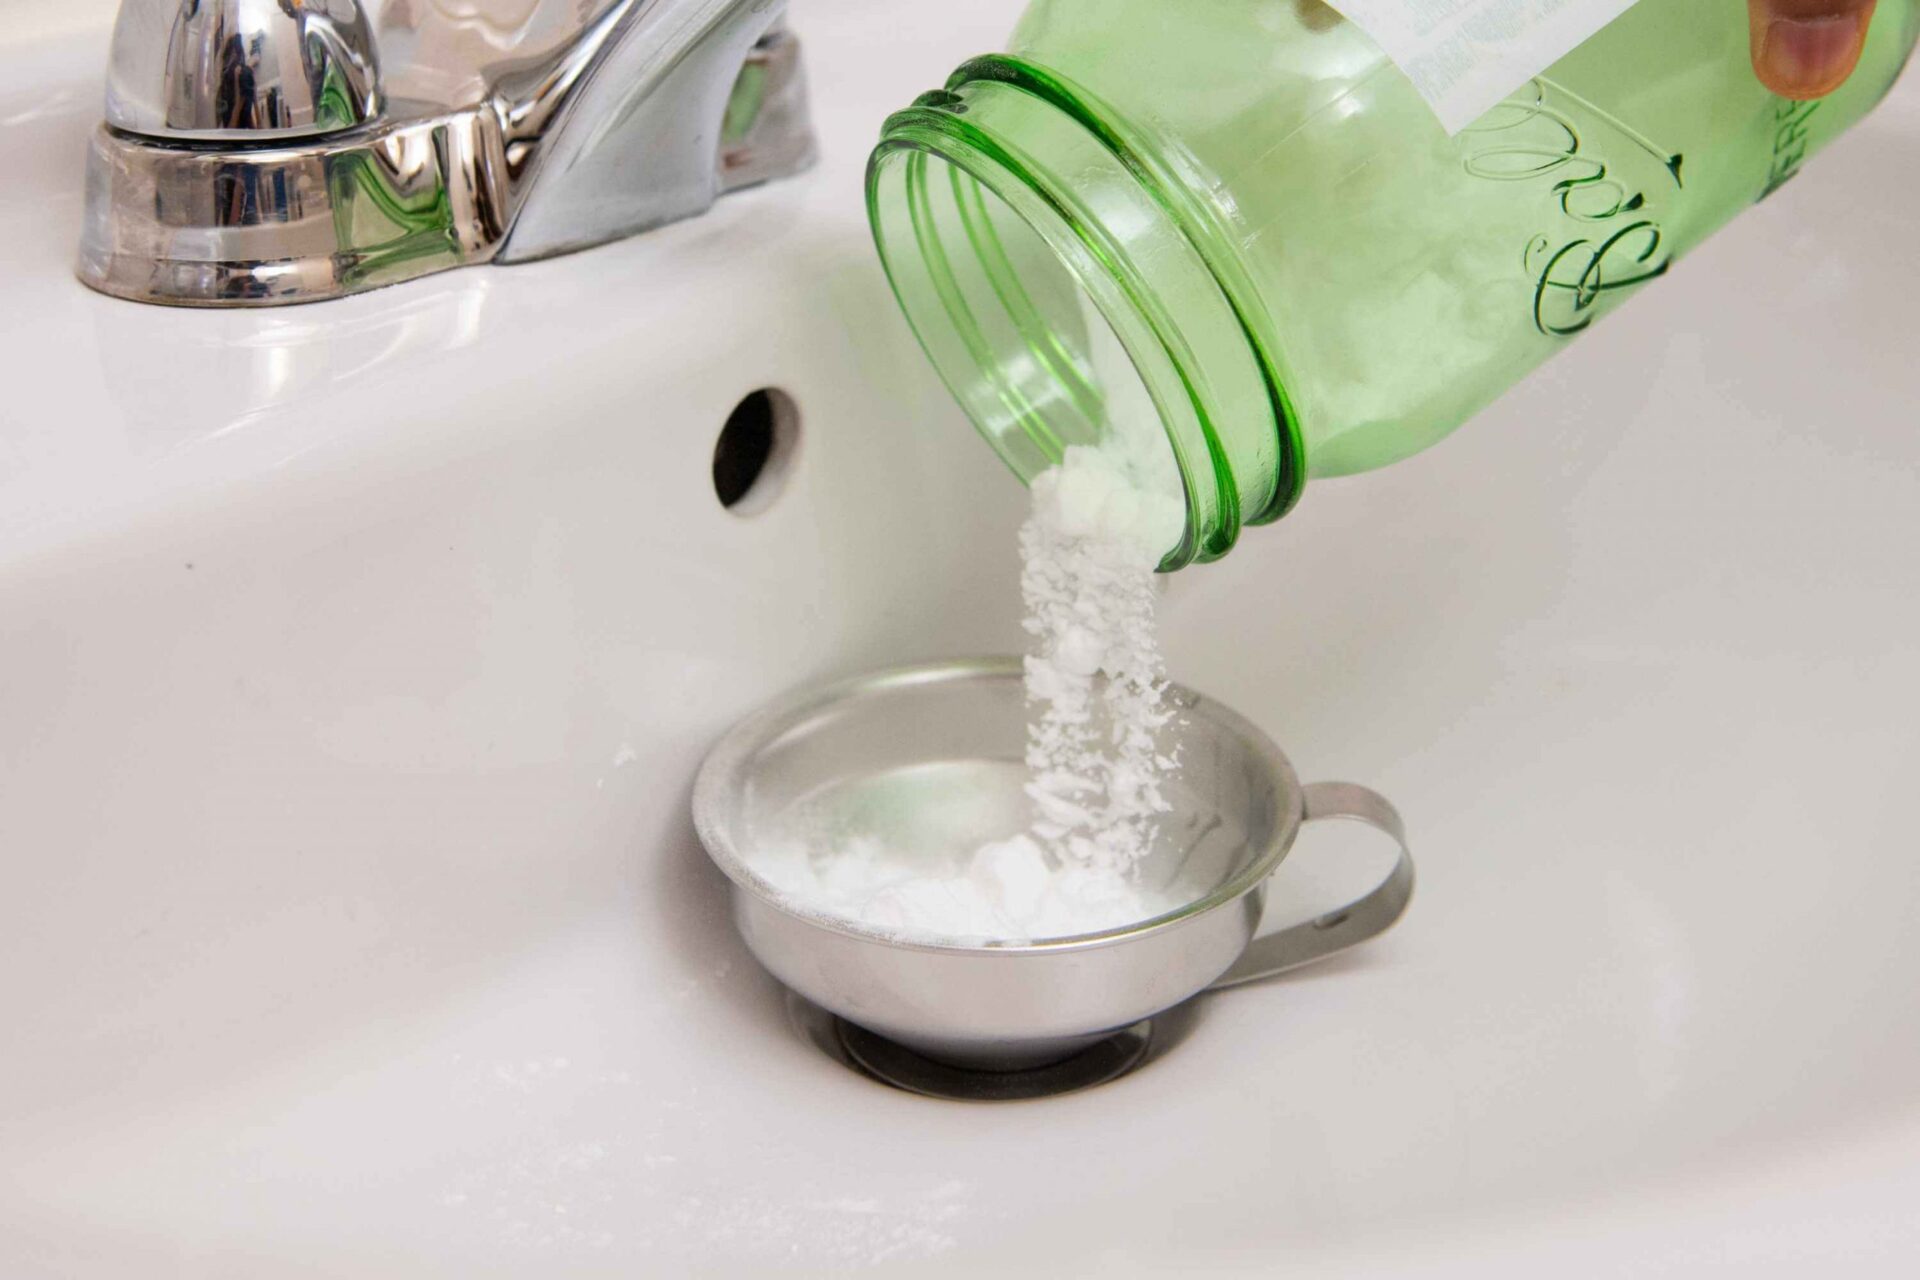 Tips to Clean Clogged Drains